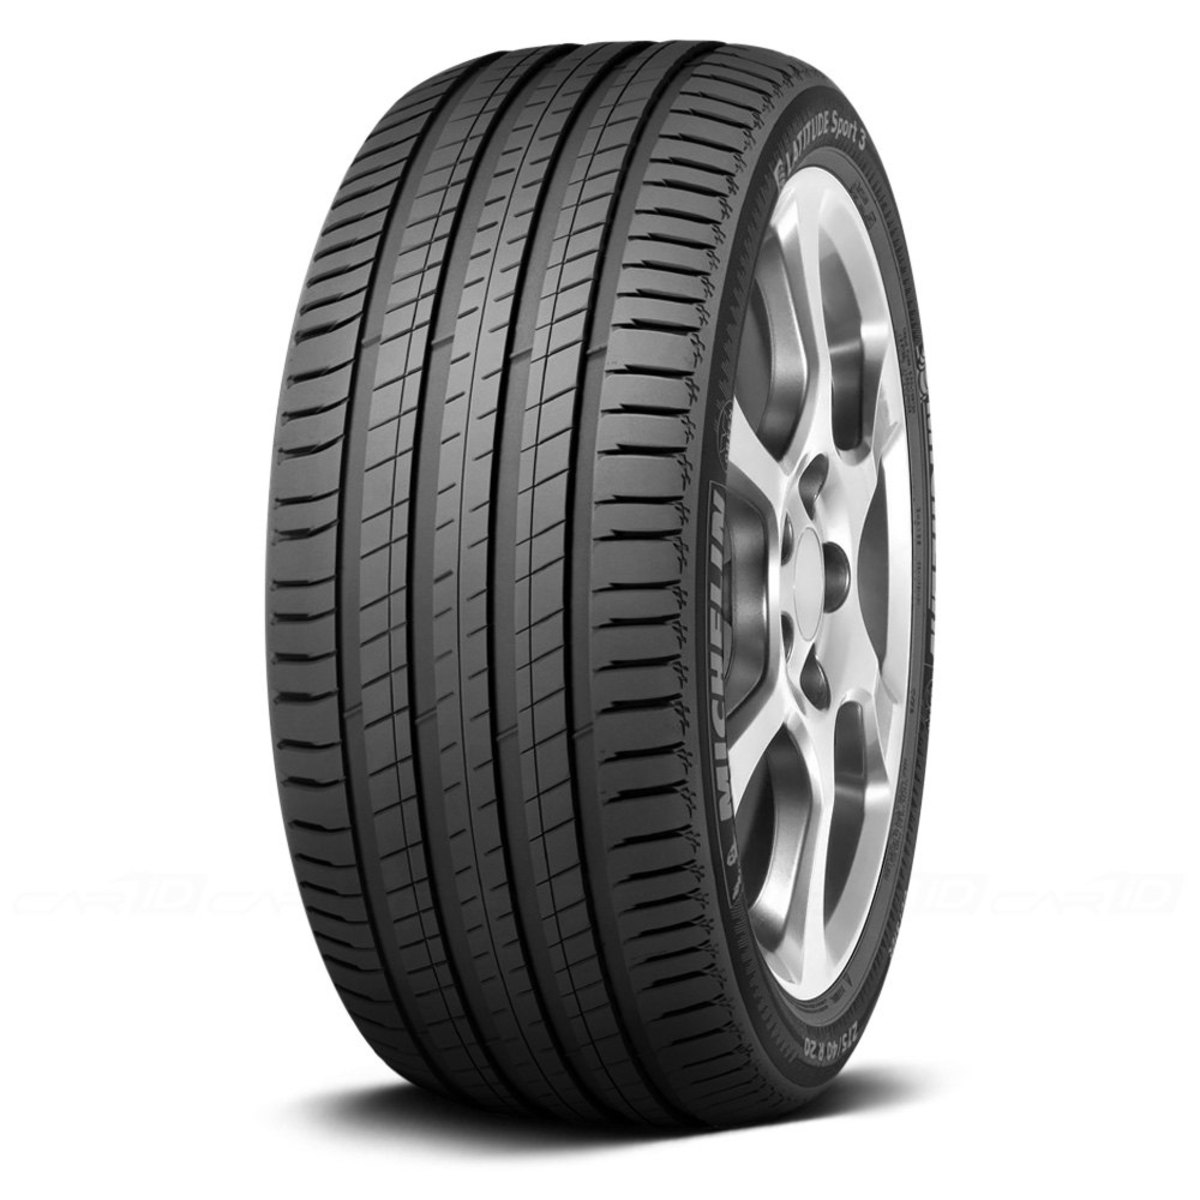 Michelin Latitude Sport 3 - Tyre Reviews and Tests